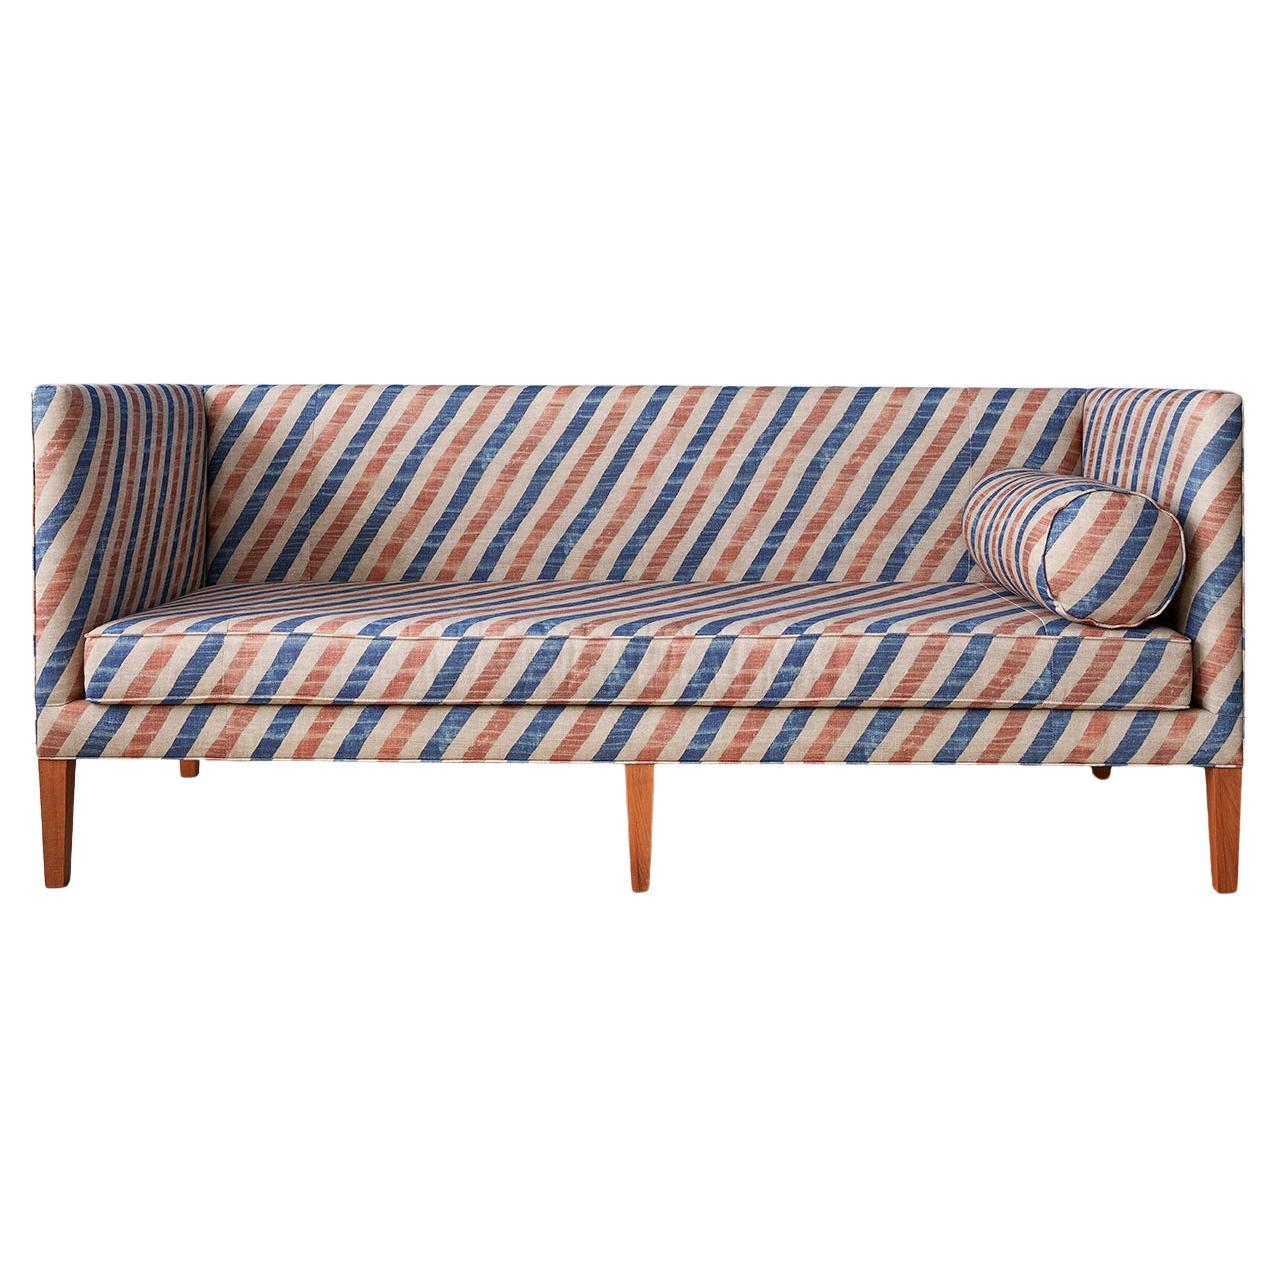 Contemporary Sofa in Customized Striped Upholstery by the Apartment, Belgium For Sale